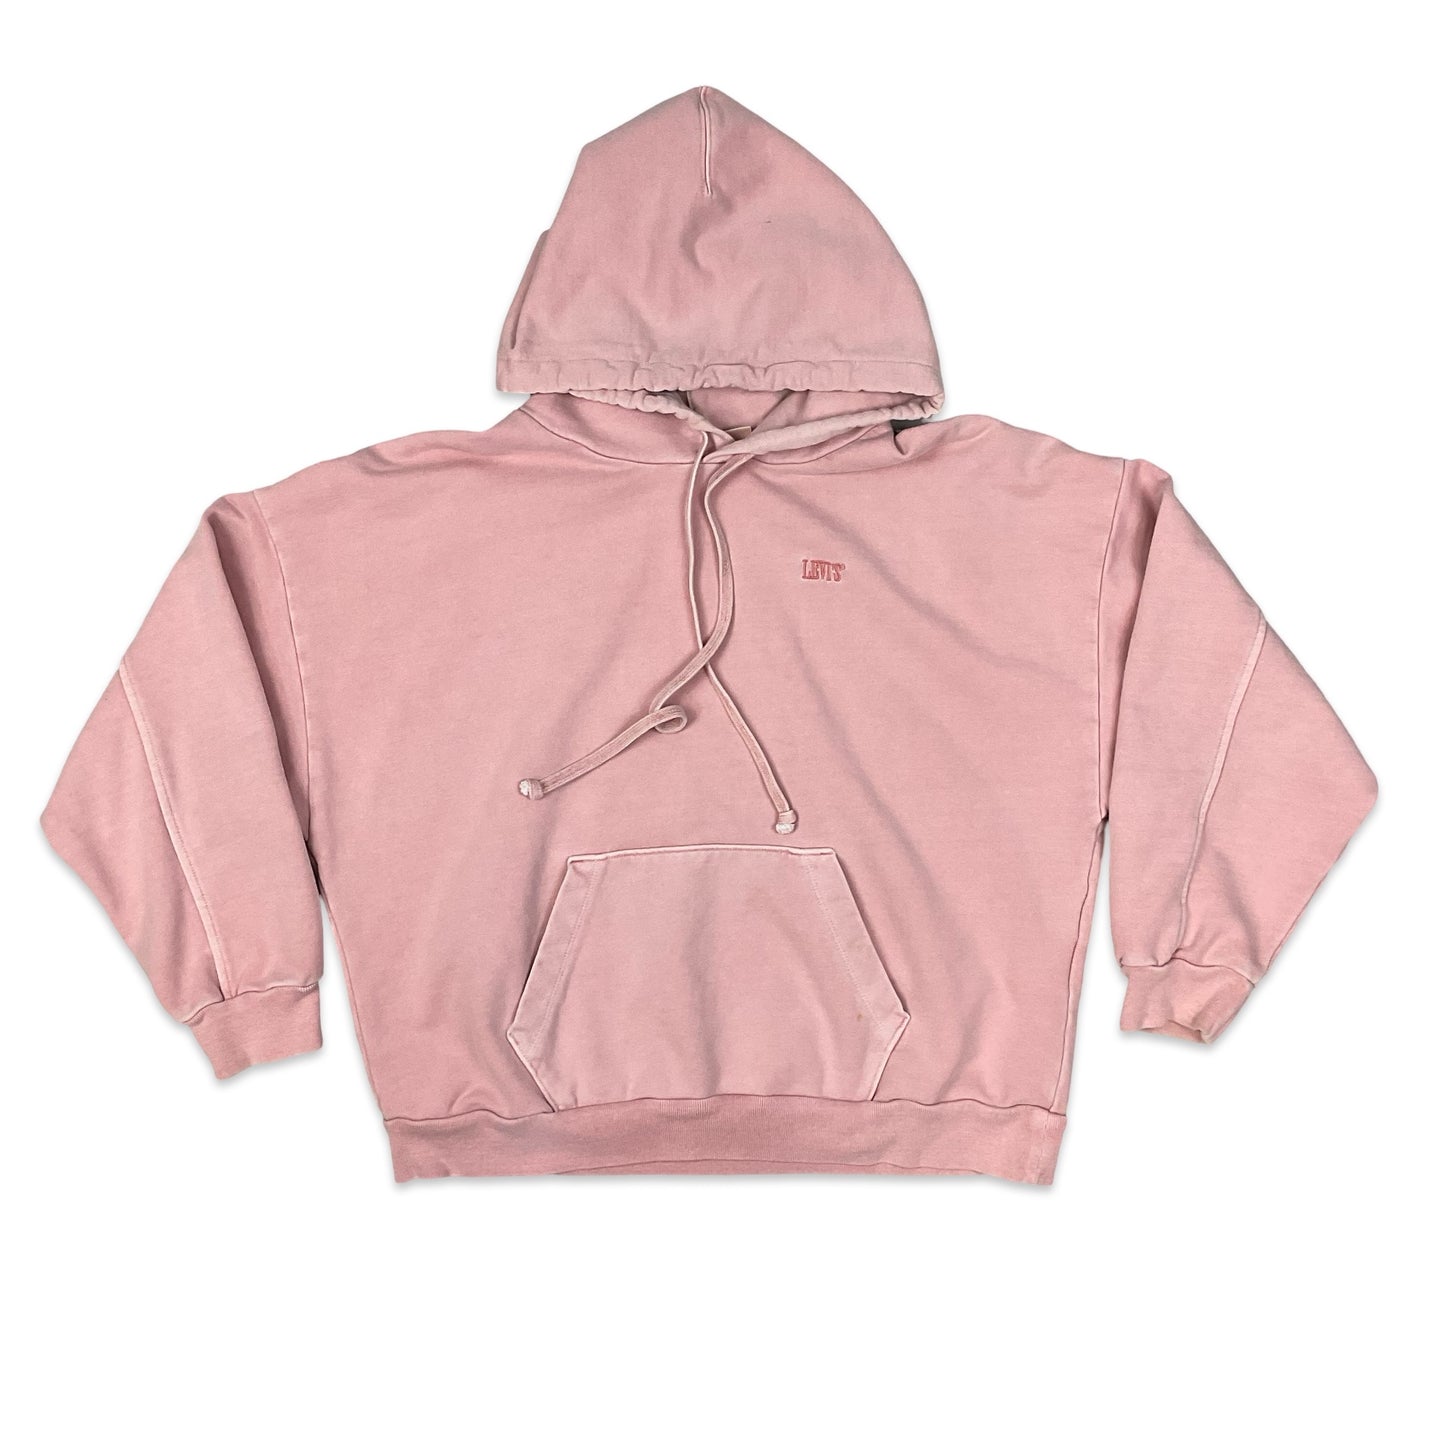 Levi's Pink Faded Pullover Hoodie XXL 3XL